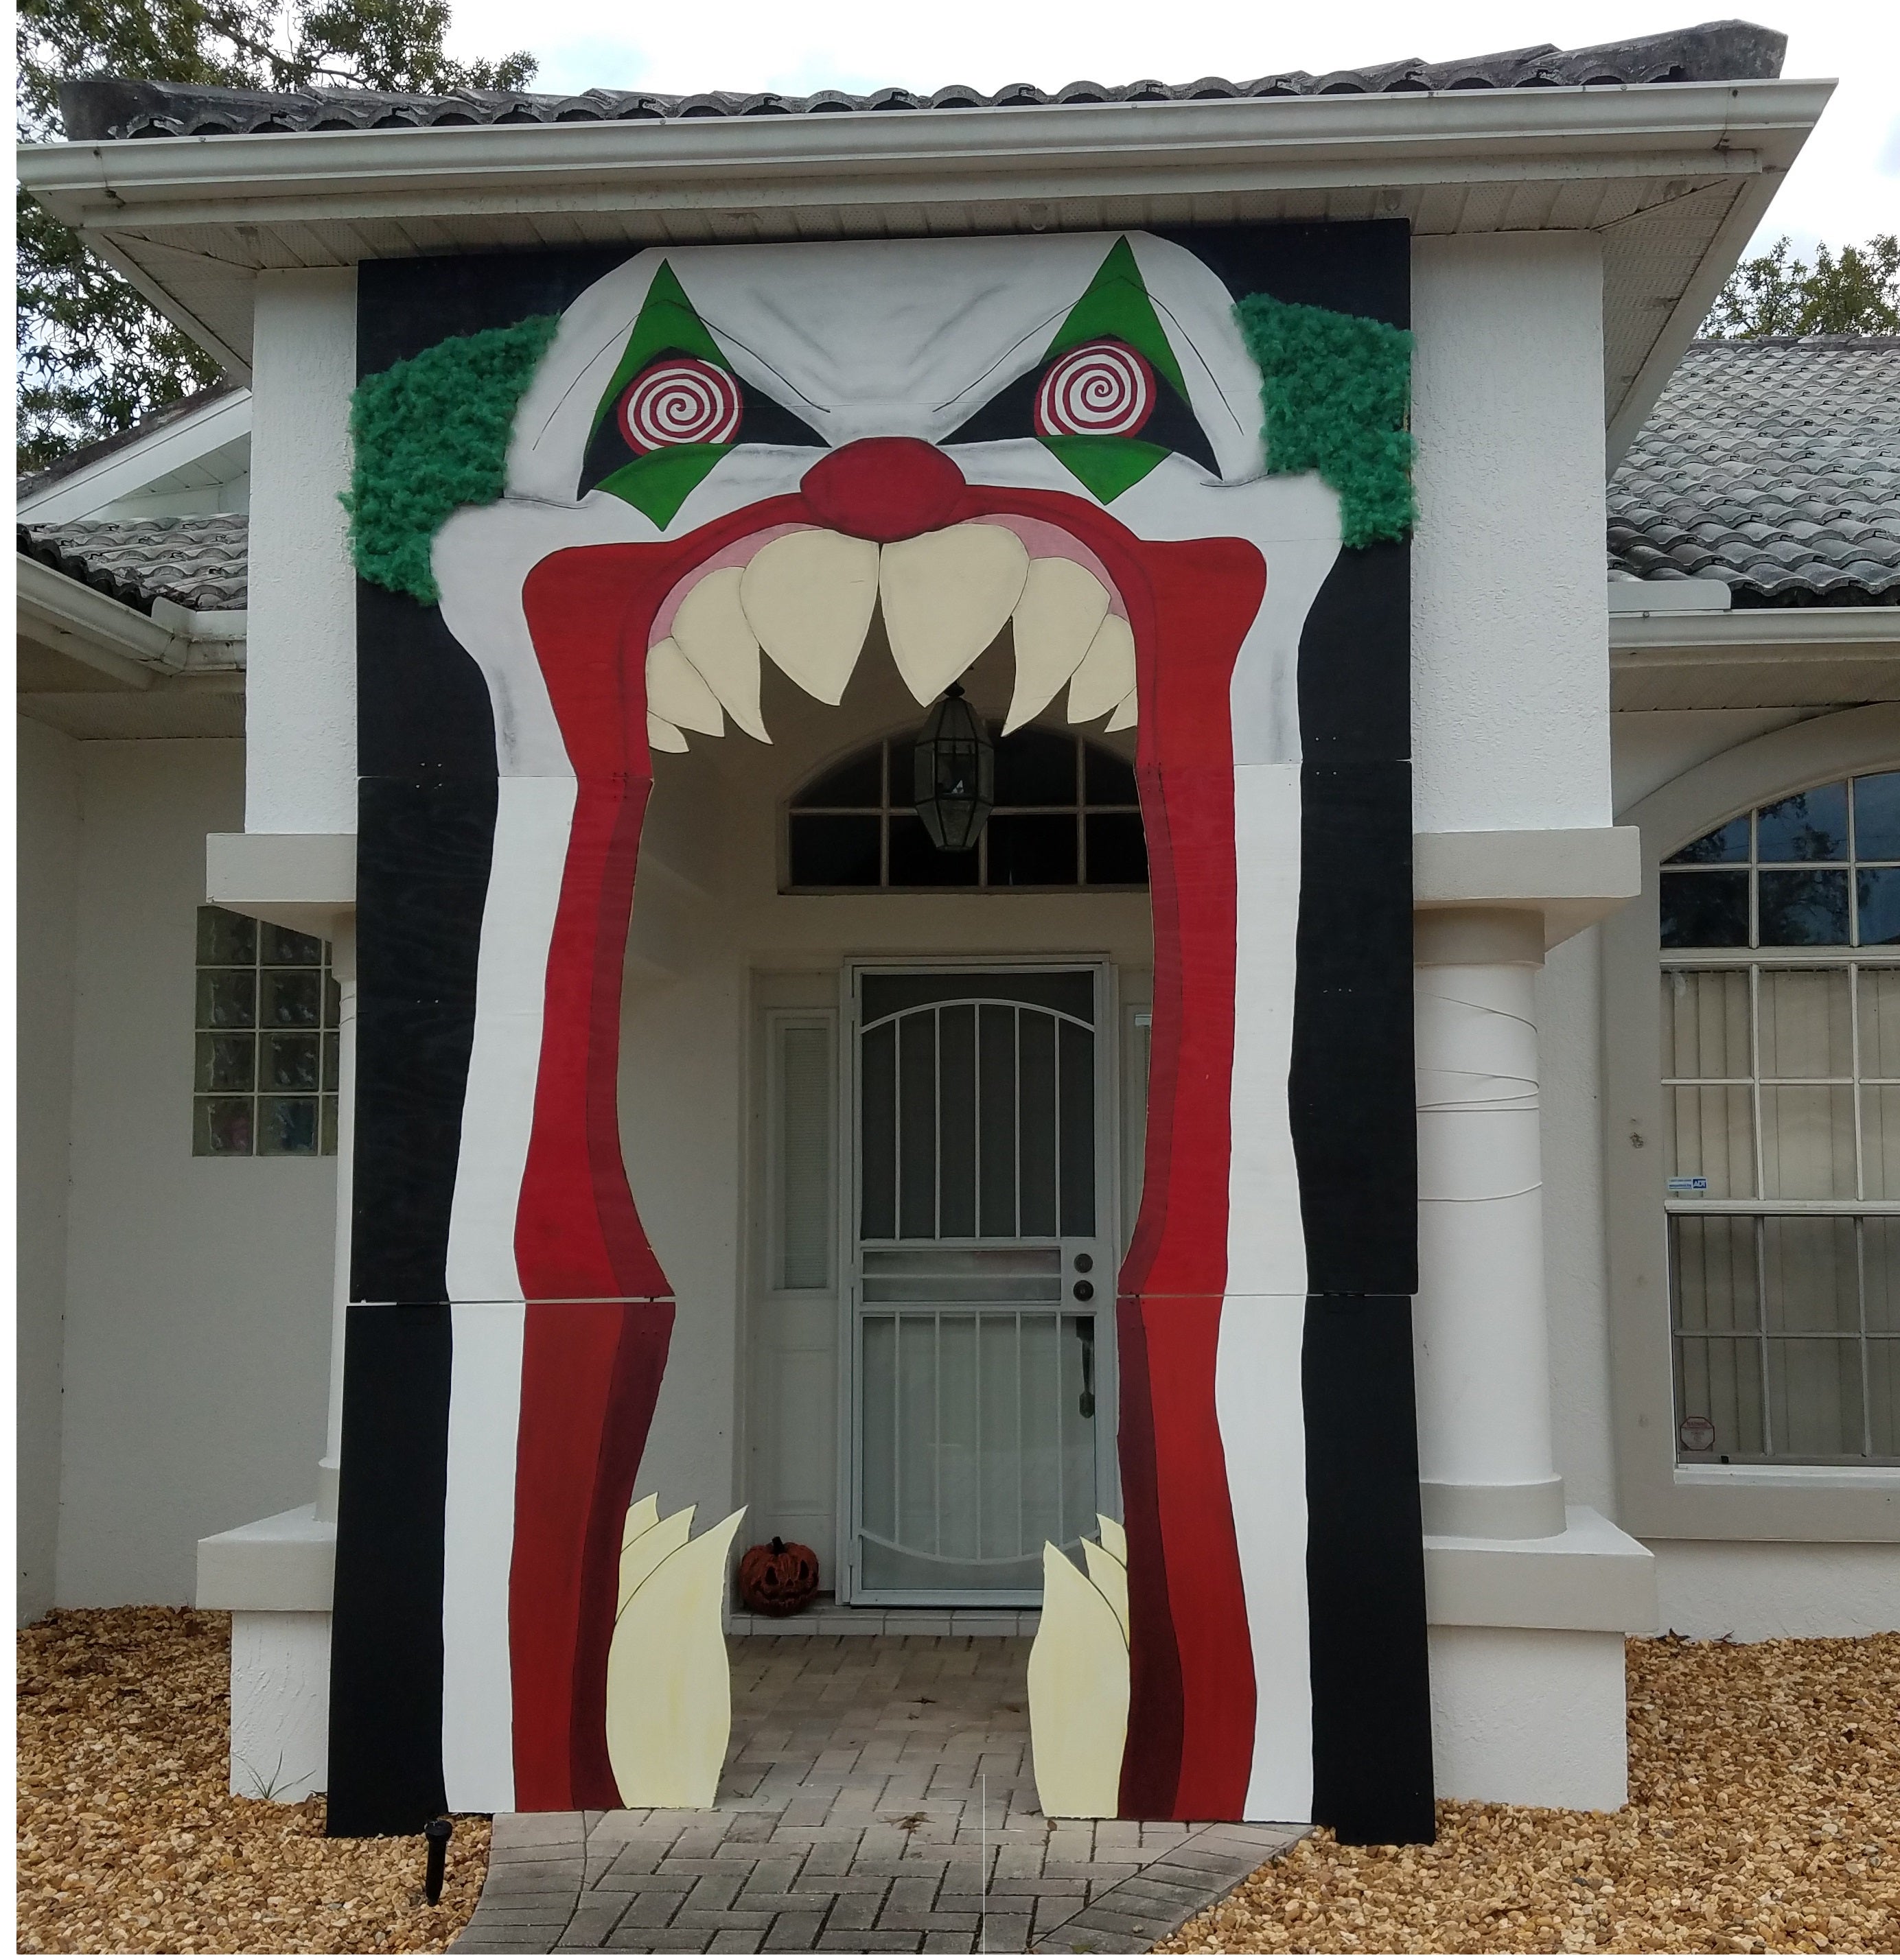 DIY Clown mouth entrance: how to secure better? | Halloween Forum